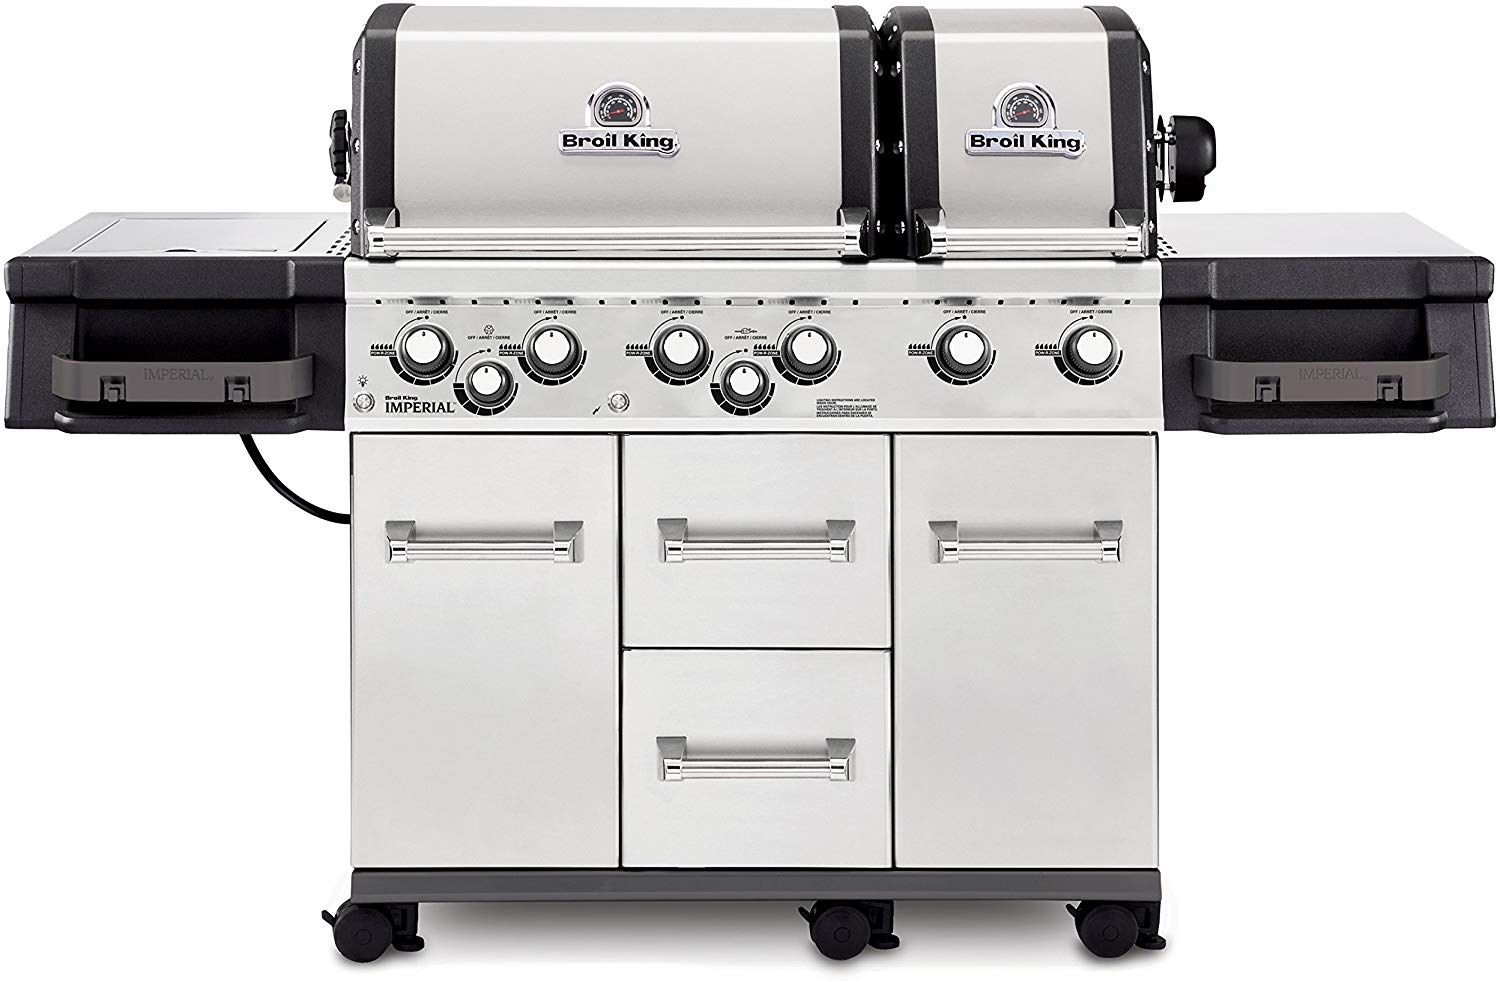 Choosing A High-End Grill With High-Performance Features